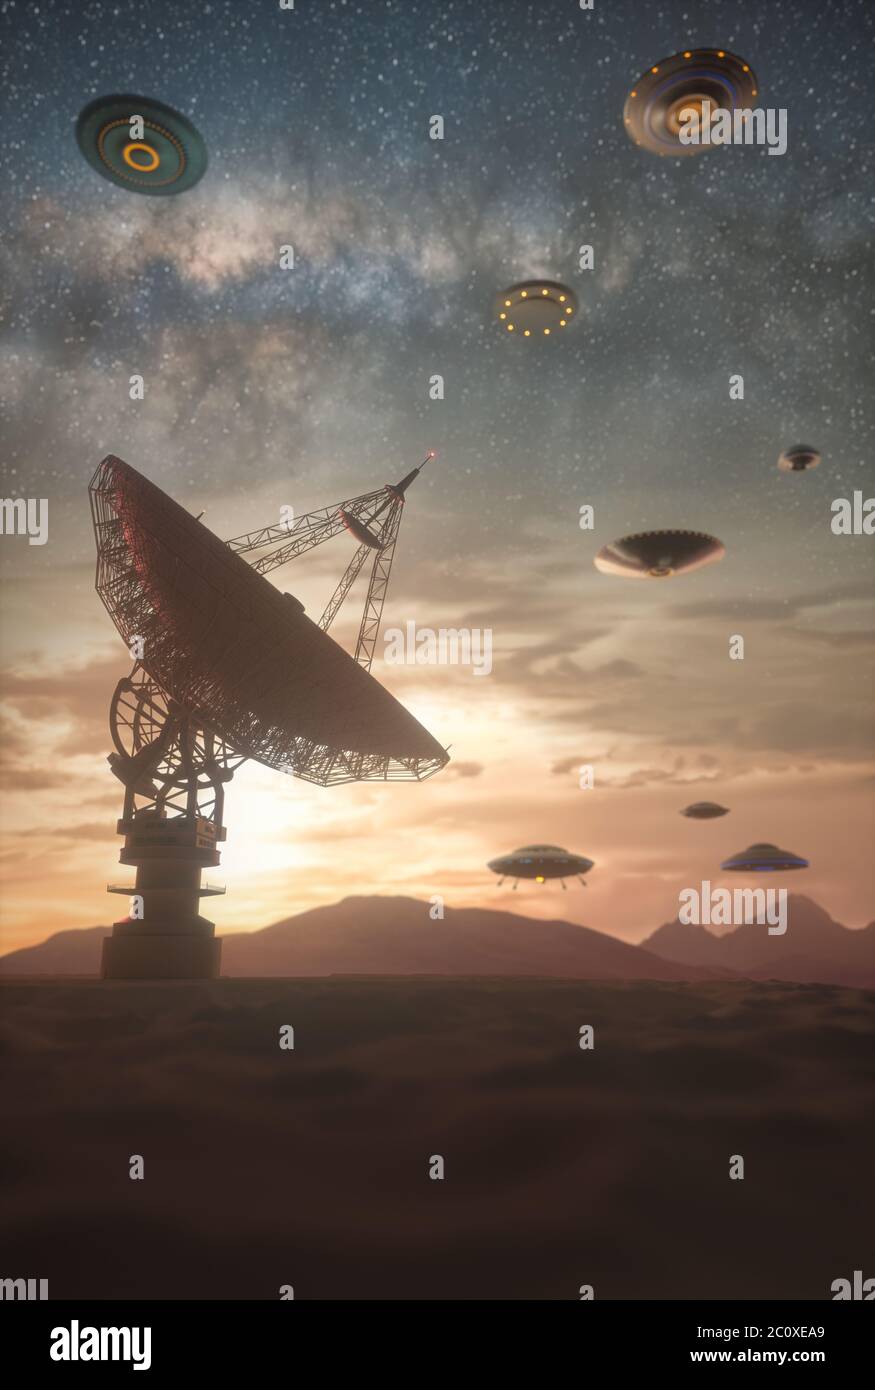 Alien invasion, illustration. Swarm of unidentified flying objects (UFOs) over a satellite dish. Stock Photo